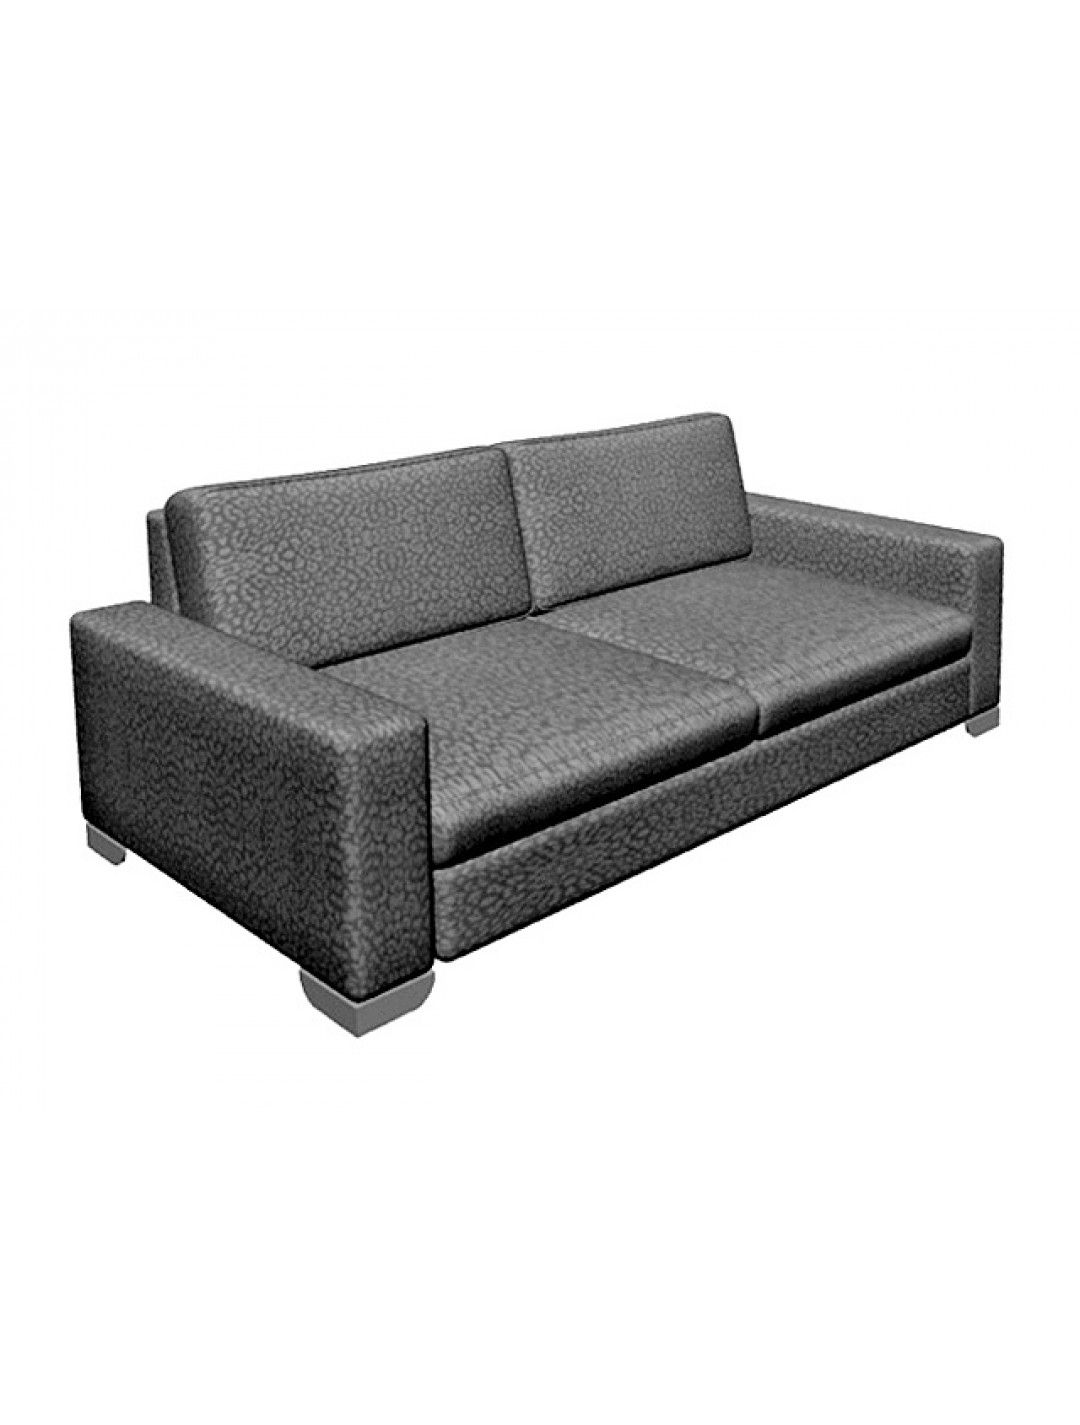 Orson 100 2 Seater Sofa , Upholstery: Without Fabric Inside Orsen Tv Stands (View 4 of 15)